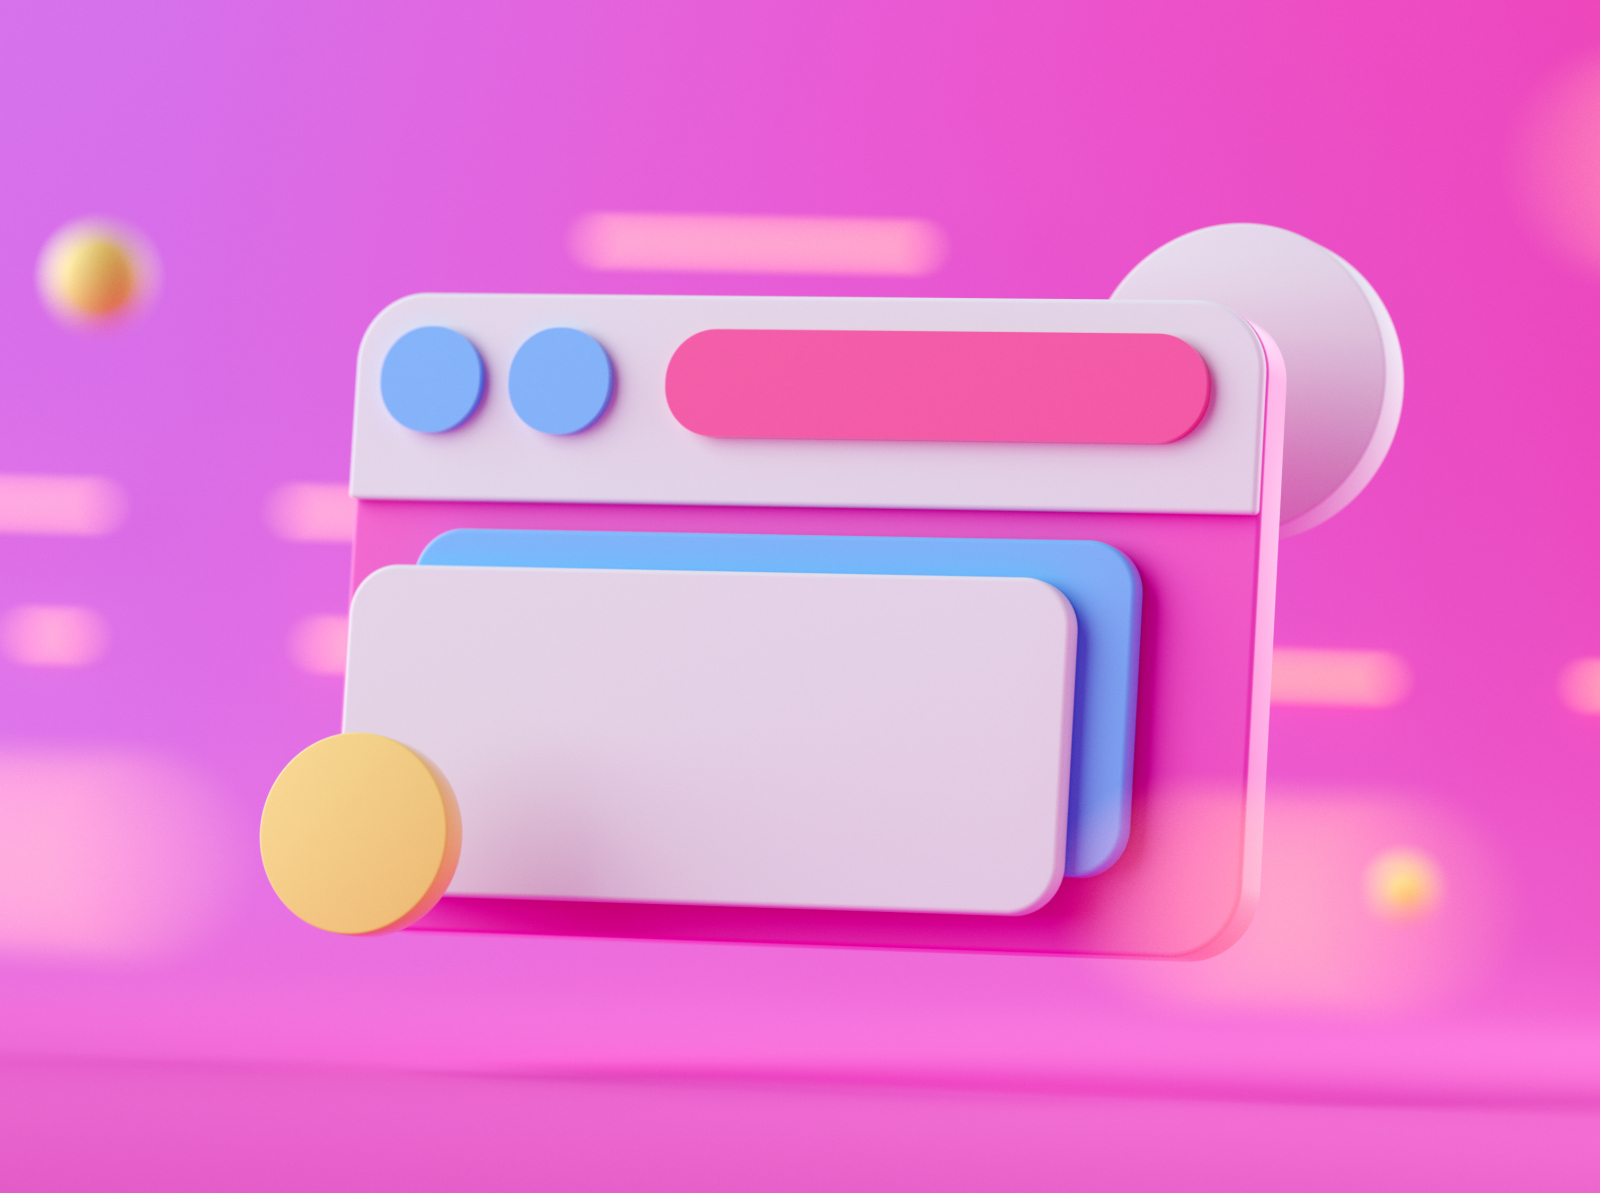 3D UI Element by Gustavo Henrique on Dribbble